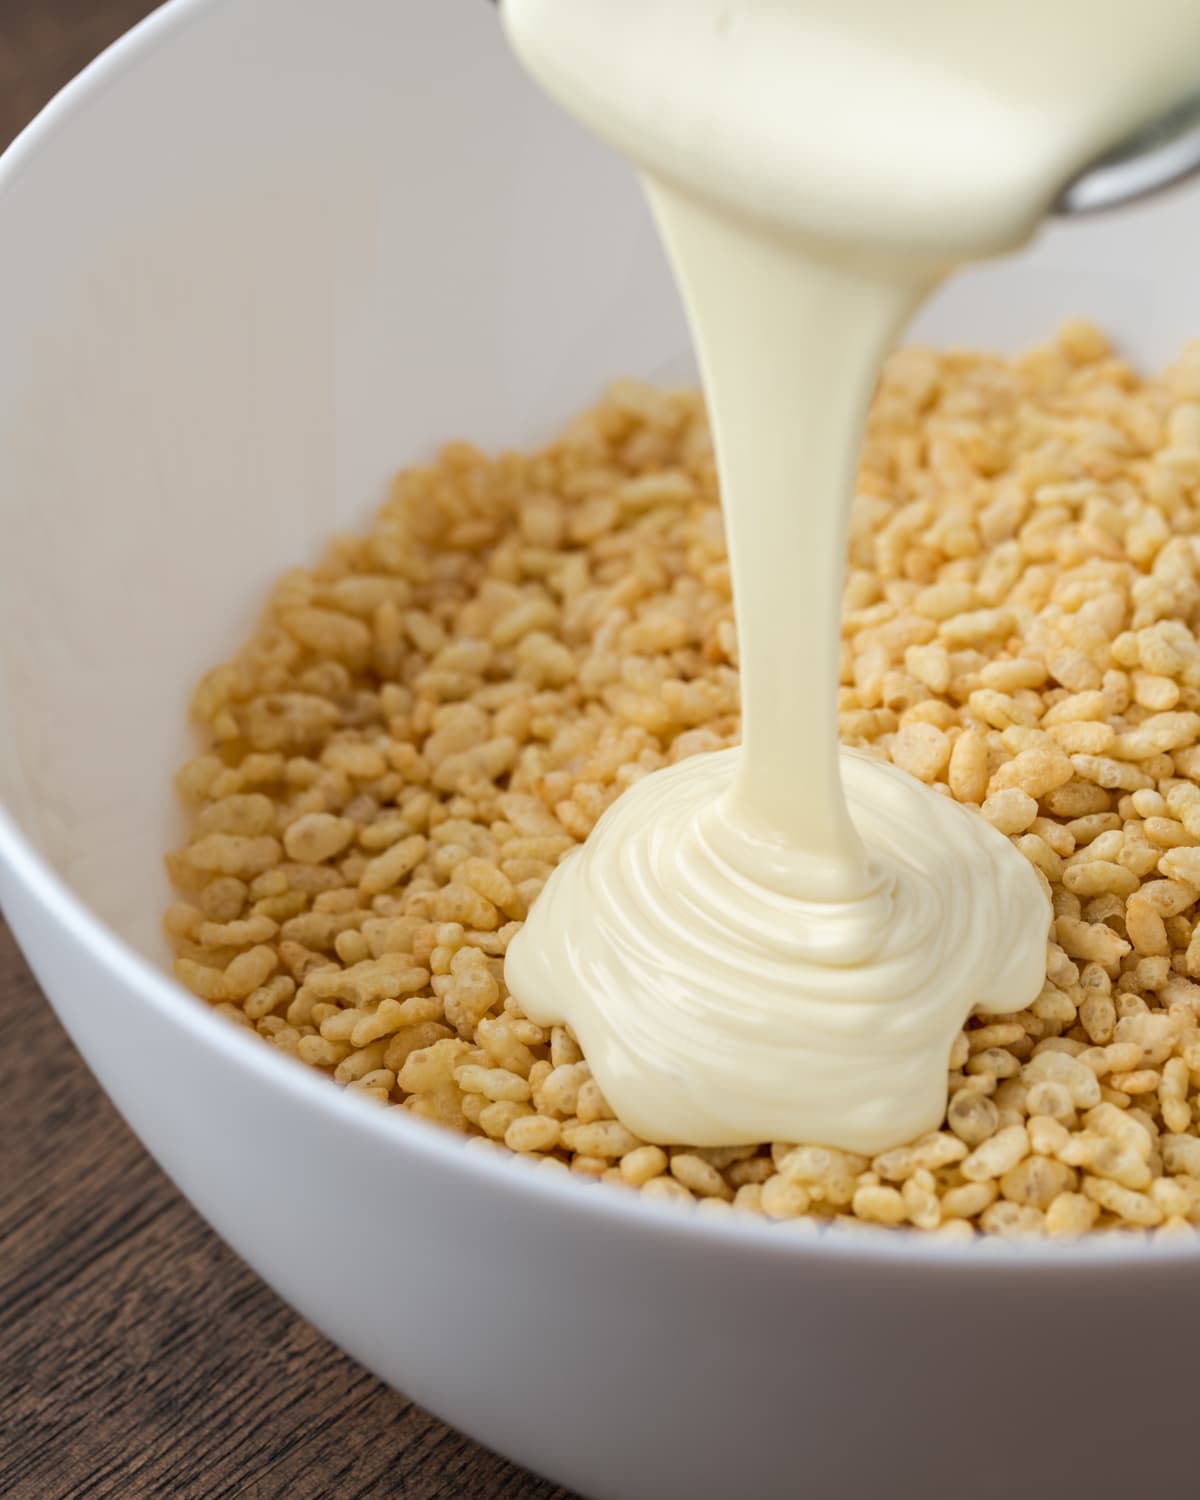 Melted white chocolate is poured into a white mixing bowl with Rice Krispie cereal.